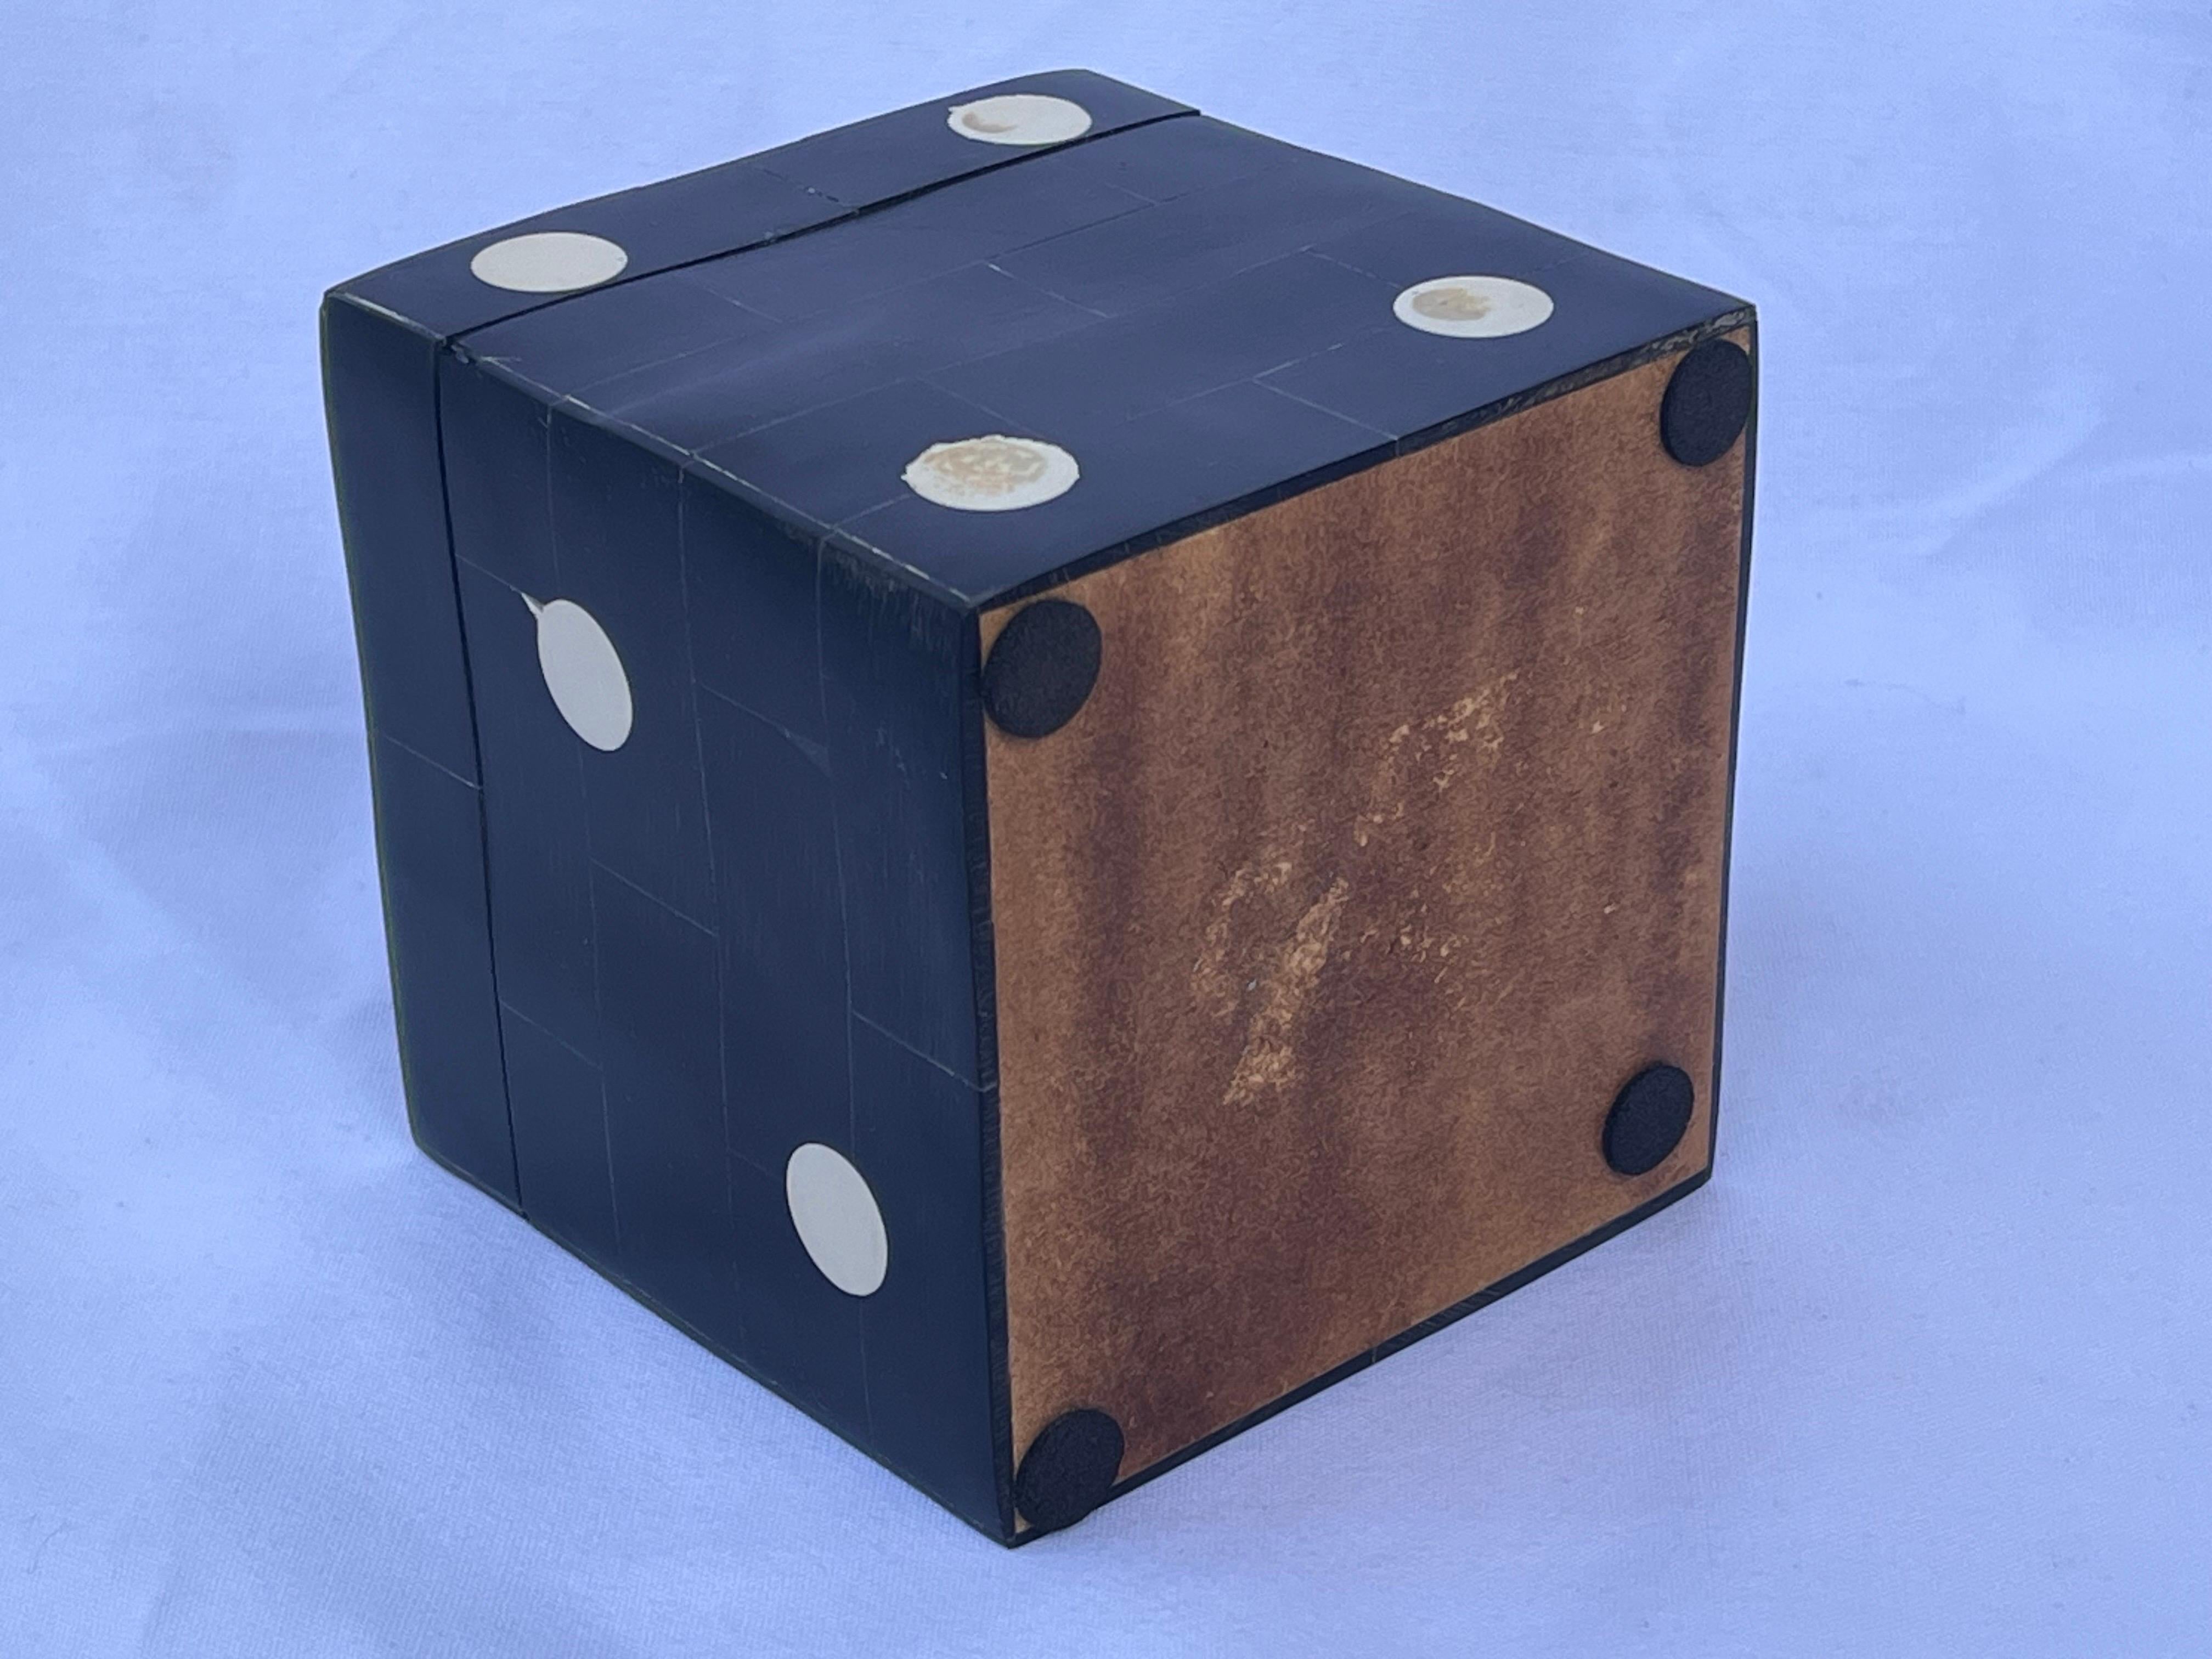 Tessellated Vintage Dice or Die Lidded Cube Box Paperweight Desk Accessory  For Sale 4